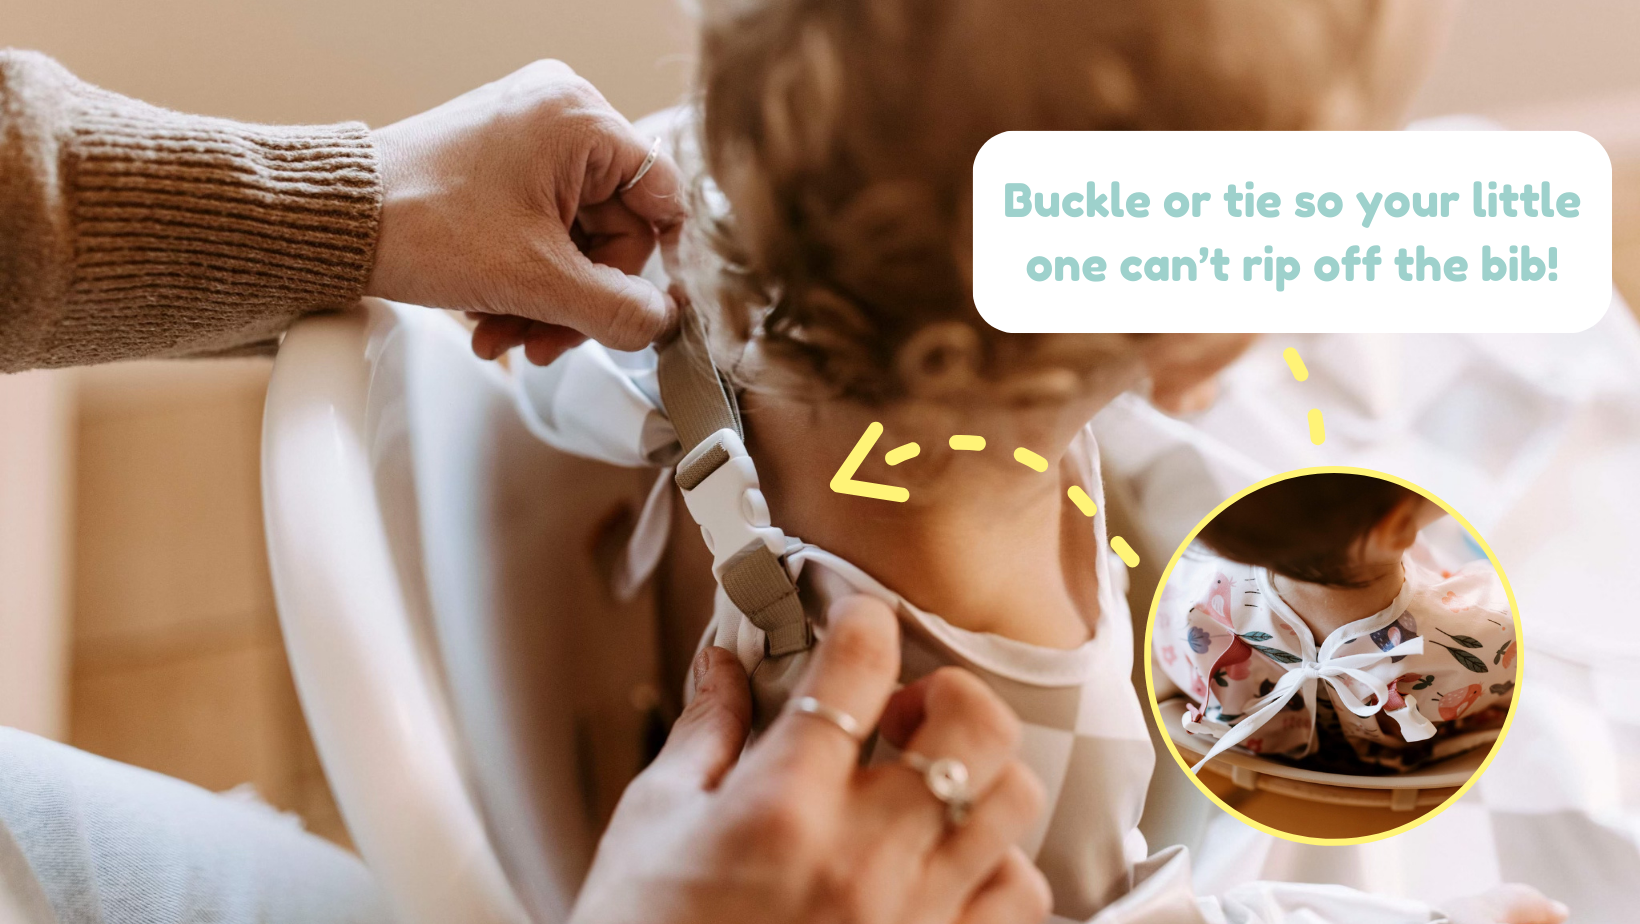 Close-up of hands fastening a secure buckle on a Bibvy bib, with a caption highlighting the feature that prevents little ones from ripping off the bib.